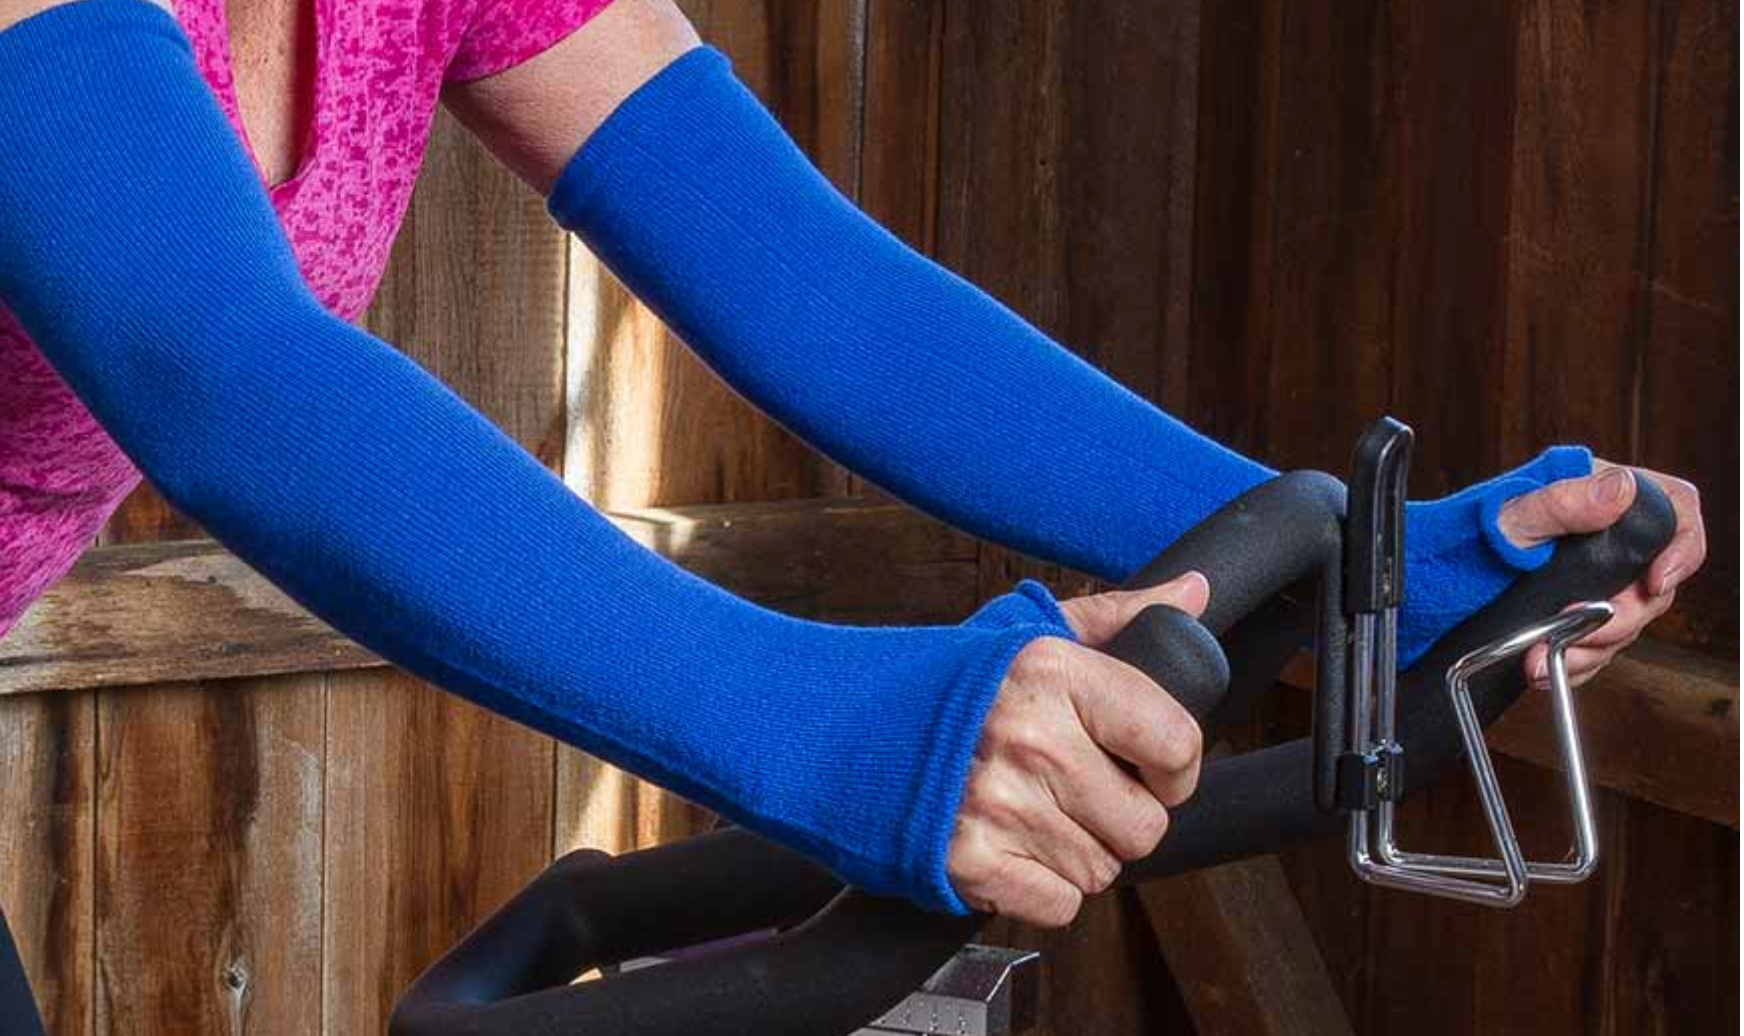 Limbkeepers are non compression garments and shown here is a person using the arm sleeves whilst exercising to protect their arms from bumps and bruises and knocks which can cause very painful injuries